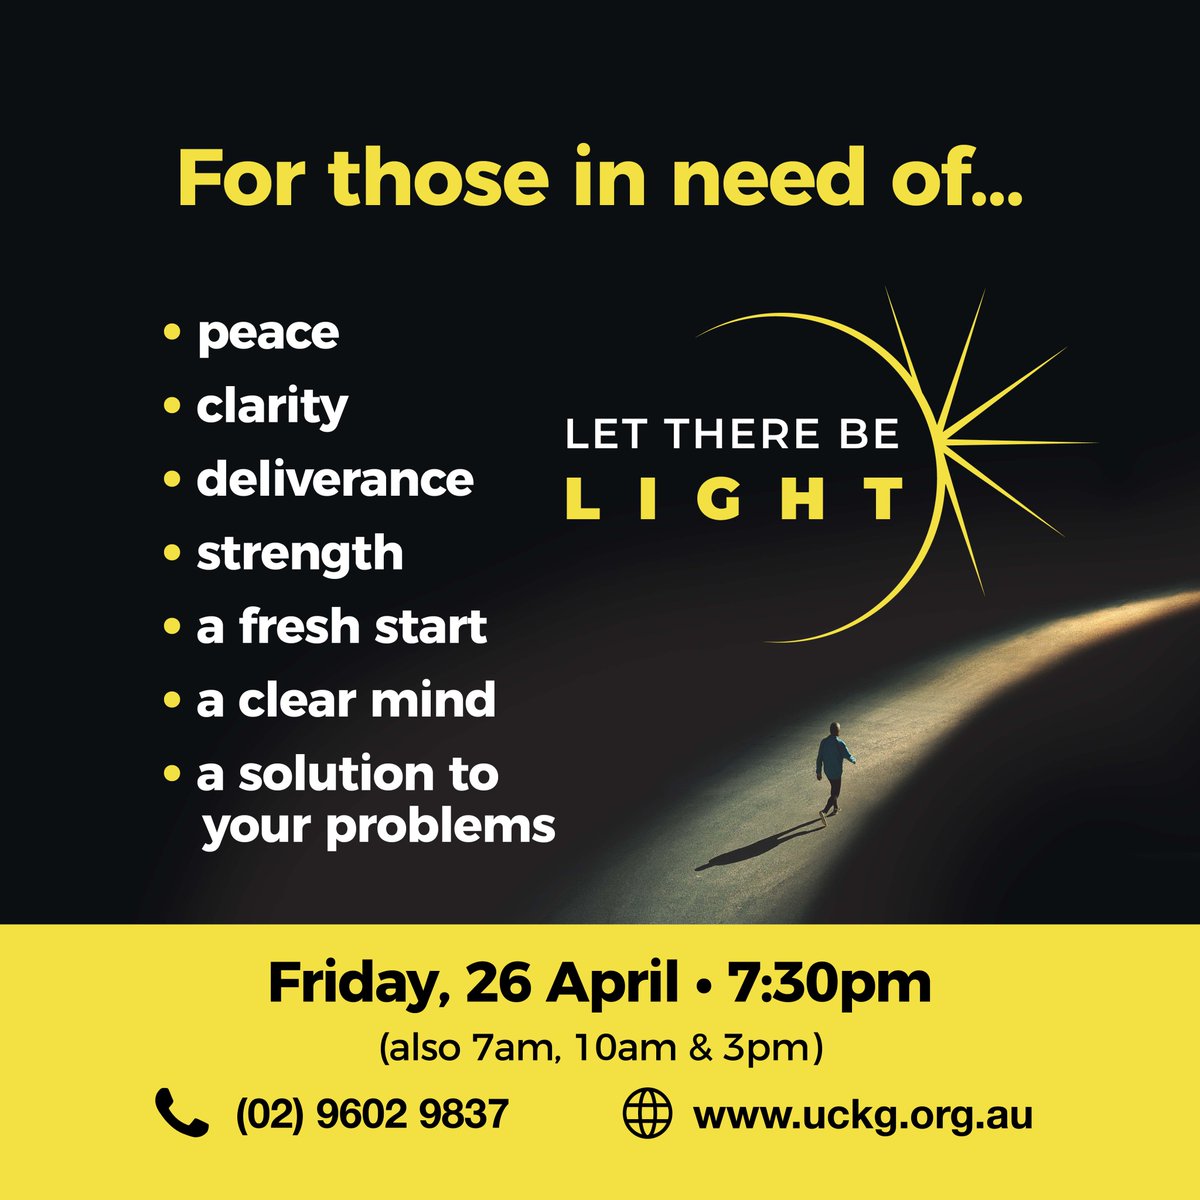 'Then God said, “Let there be light”; and there was light.' (Genesis 1:3) 

#LetThereBeLight 
📅 Fri, 26 April  
⏱ 7:30pm
📍153 Northumberland St, #LiverpoolNSW & all
other Universal churches⛪️

#Sydney #Melbourne #Brisbane #SpiritualAttack #Insomnia #Depression #Peace #UCKG